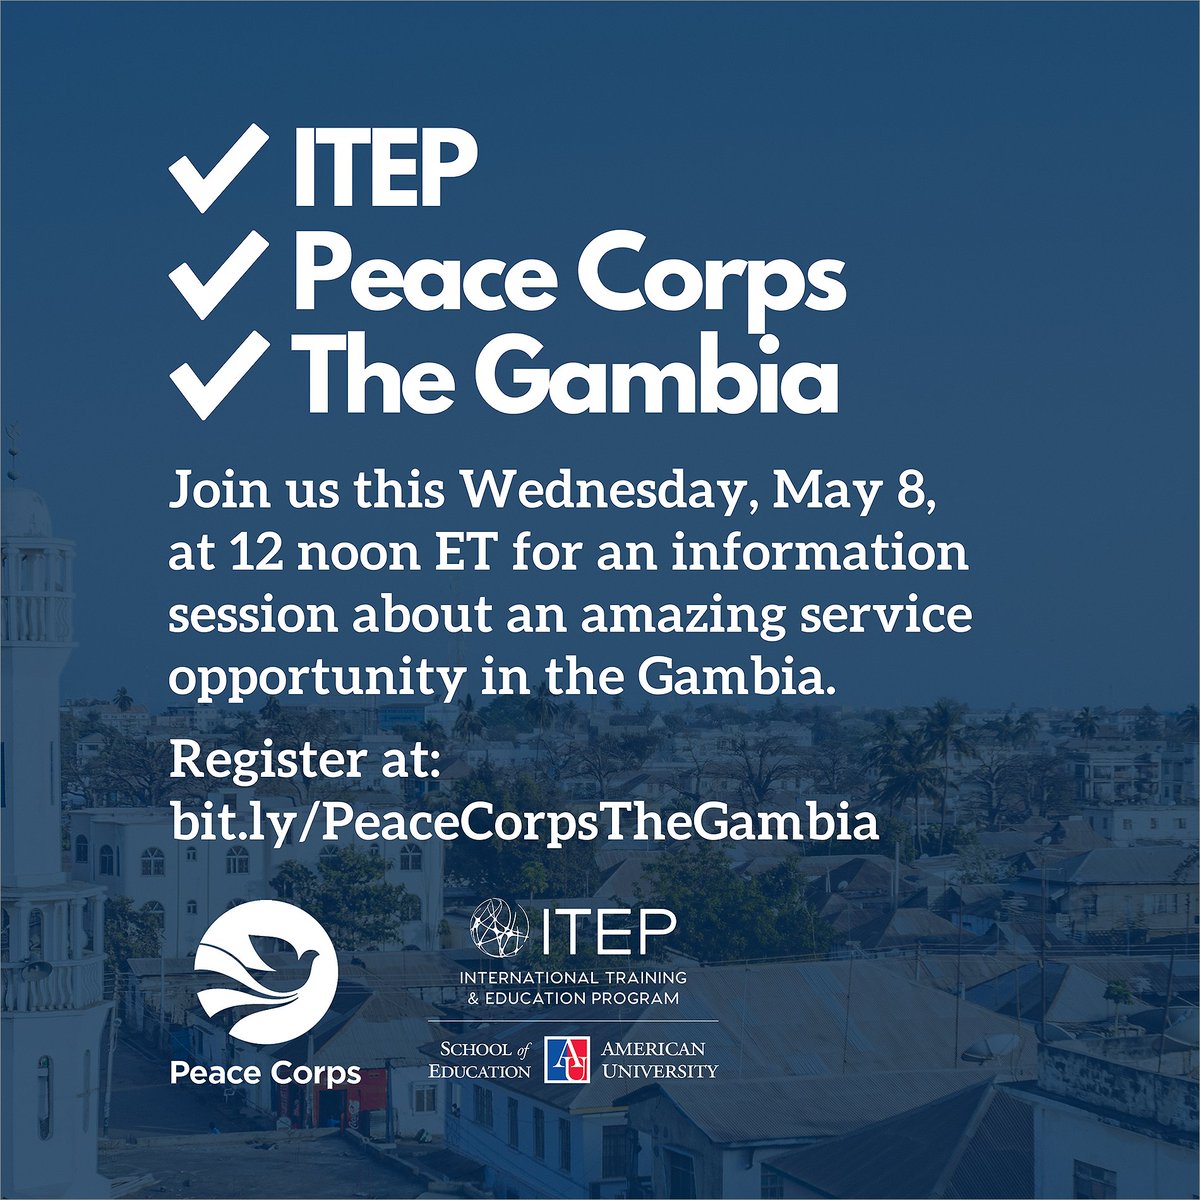 Our MA in International Training and Education Program (ITEP) has a wonderful Peace Corps service opportunity in The Gambia 🌍 for undergraduate and graduate students. Register at bit.ly/PeaceCorpsTheG… to join this Wednesday's info session about the opportunity. @AmericanU